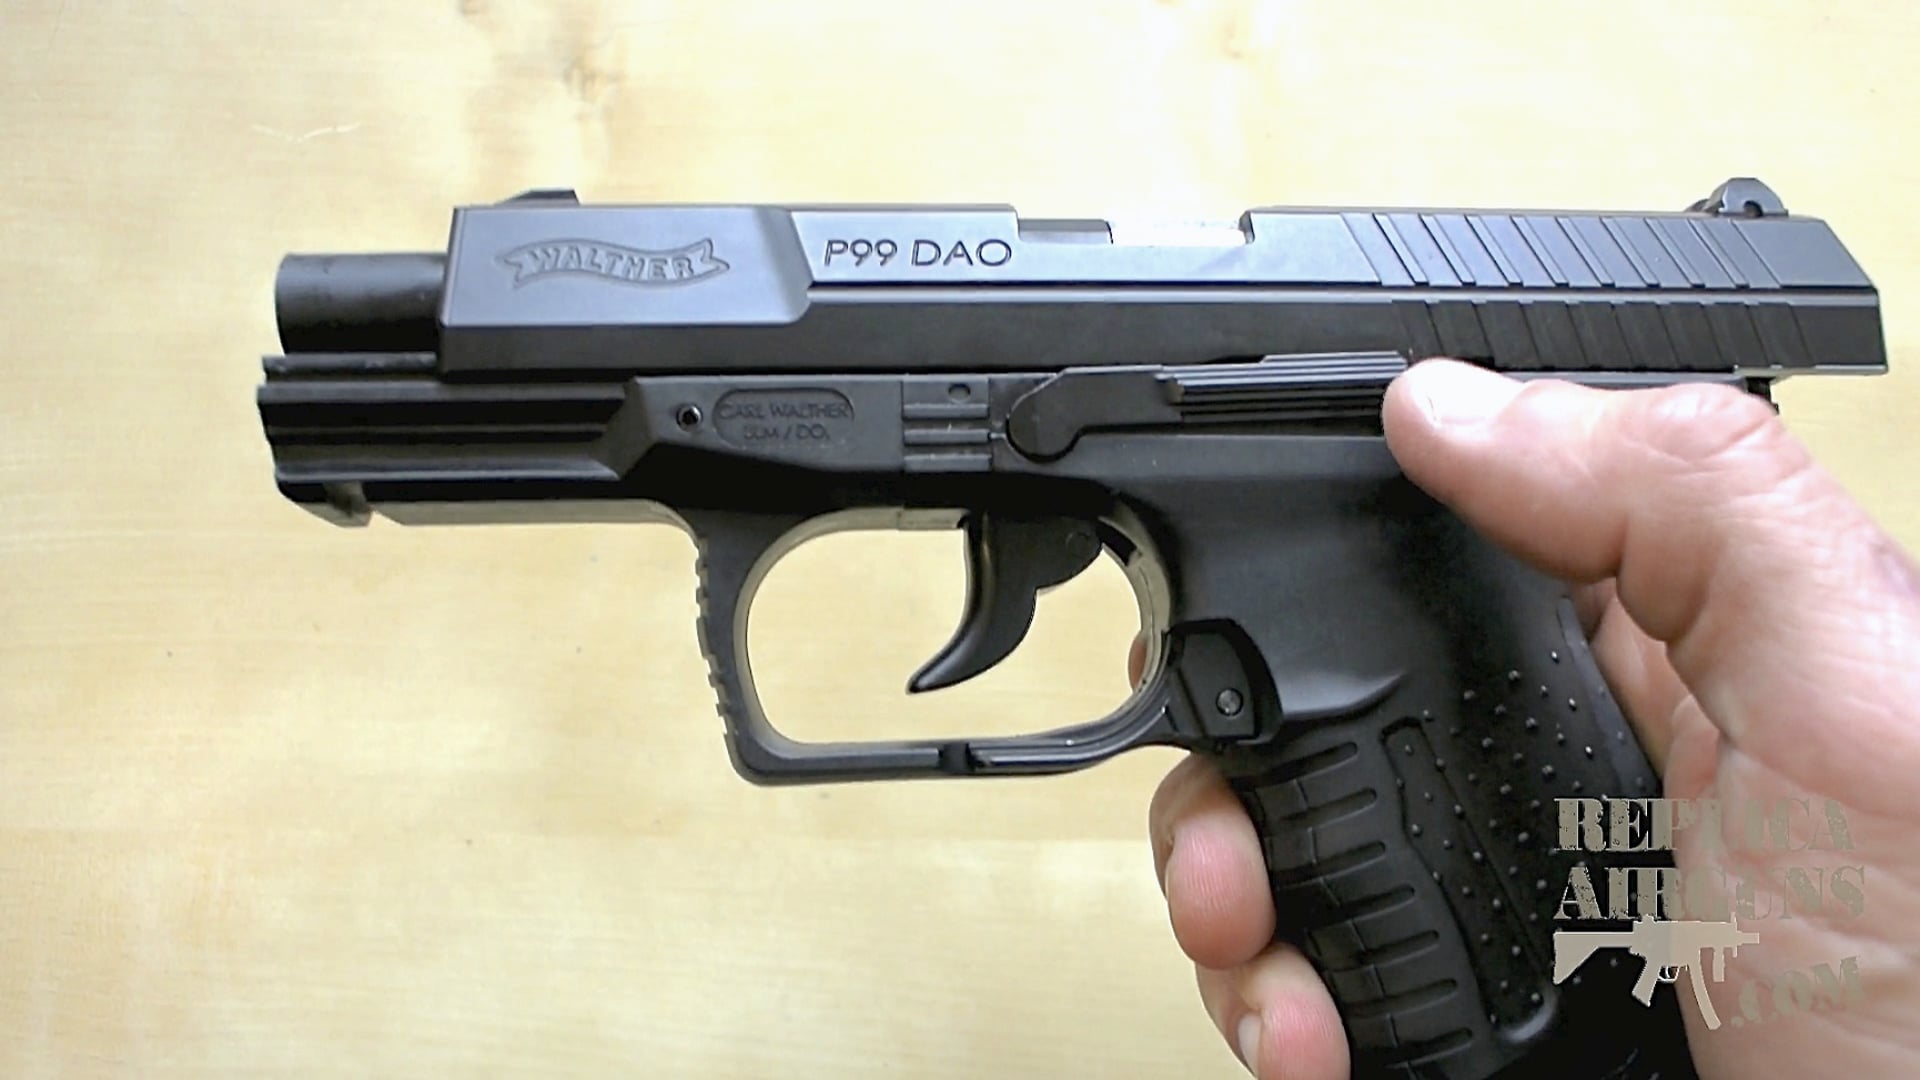 Umarex Walther P99 CO2 Blowback Airsoft Pistol Table Top Review